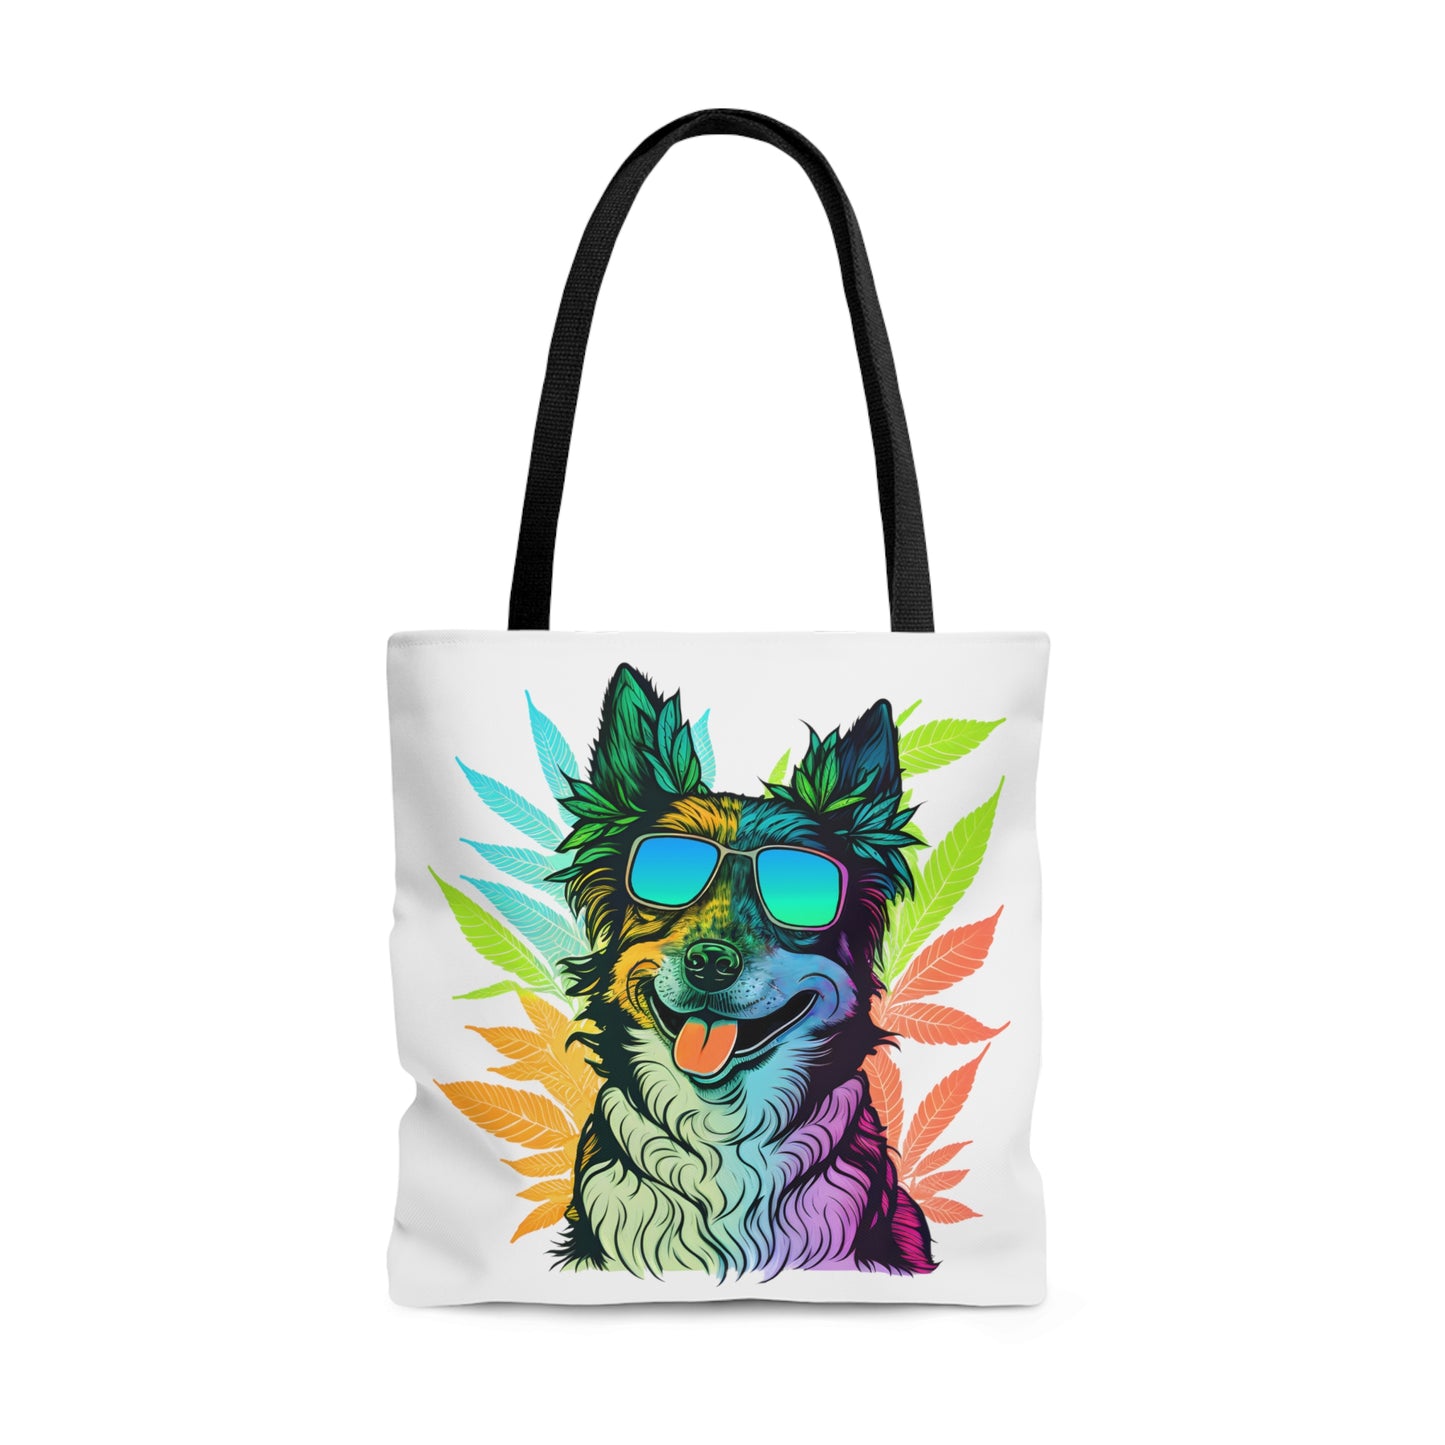 Cool Border Collie With Shades and Weed Tote Bag that has black straps and the graphic is placed on a white background